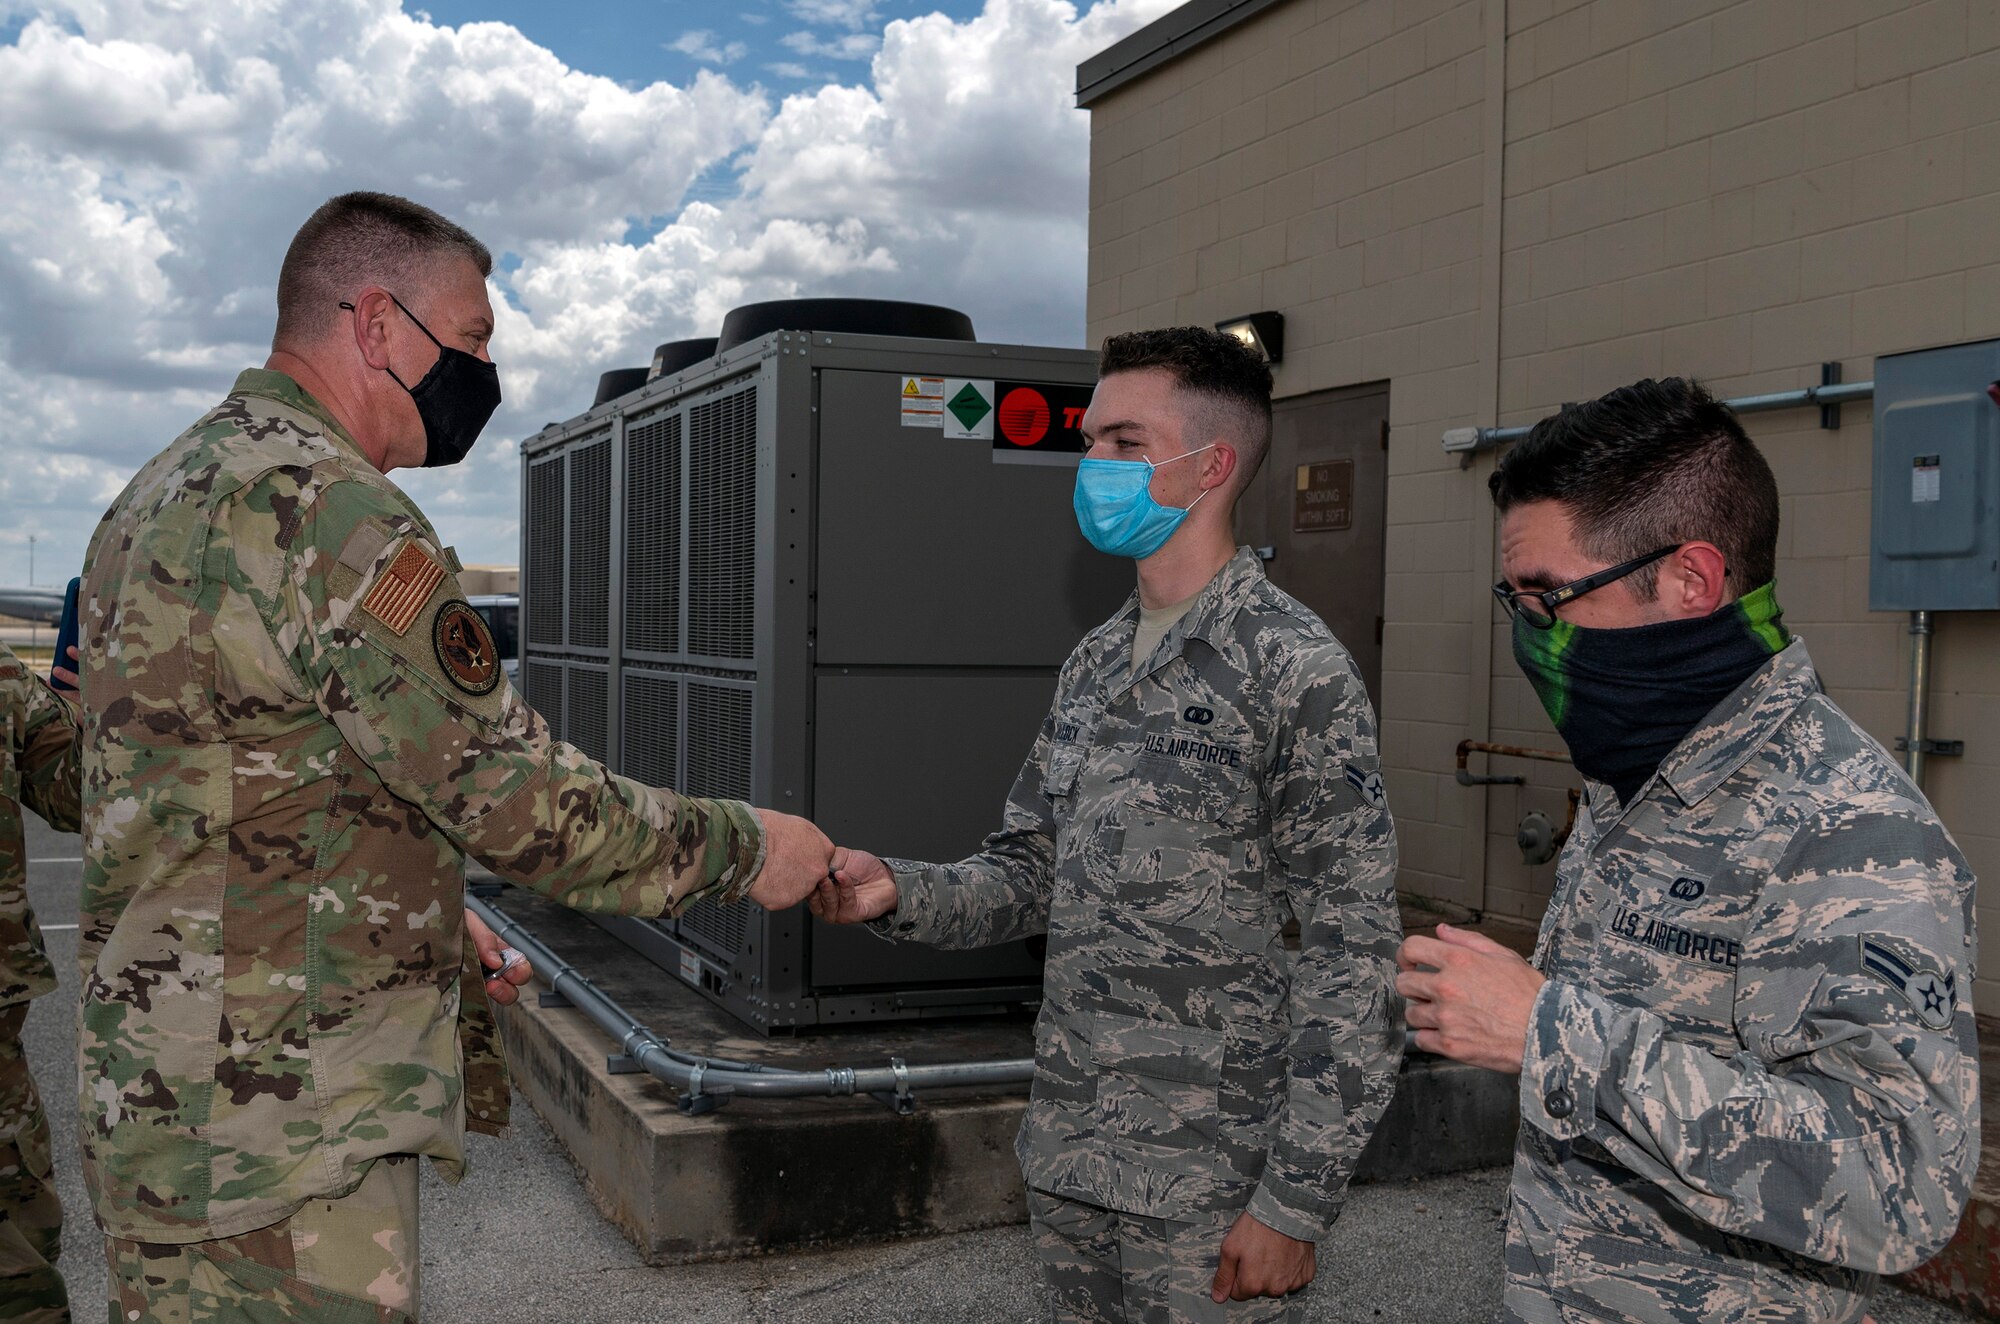 Maj. Gen. William Spangenthal, vice commander of Air Education and Training Command, coins Airman 1st Class Brian Hallock and Airman 1st Class Sebastian Flores, both from the 502nd Operational Support Squadron, during an immersion tour June 24, 2020, at Joint Base San Antonio-Lackland, Texas.